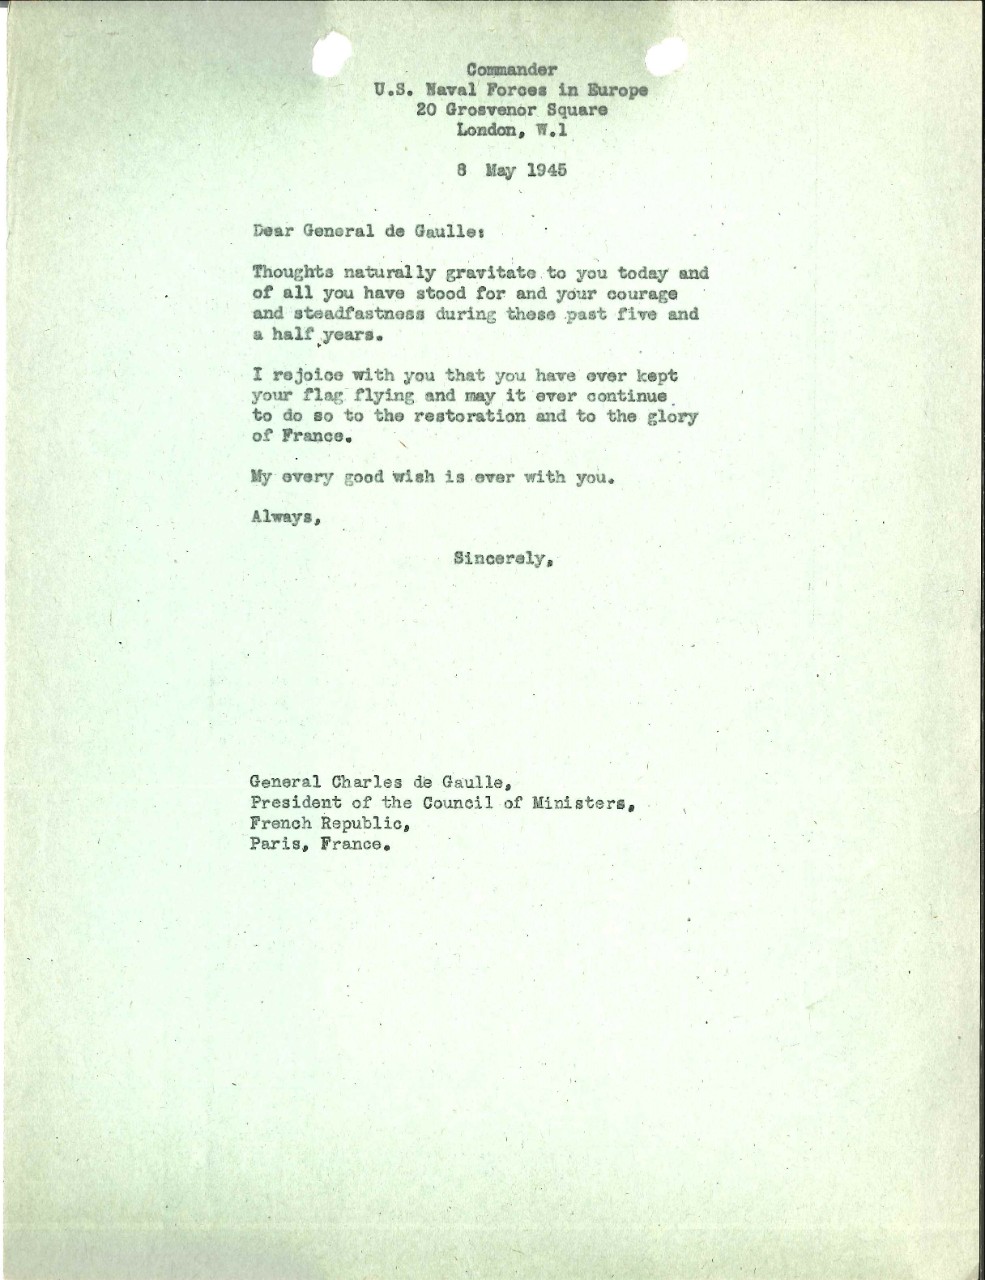 Letter from Admiral Harold Stark to Charles de Gaulle, May 8, 1945